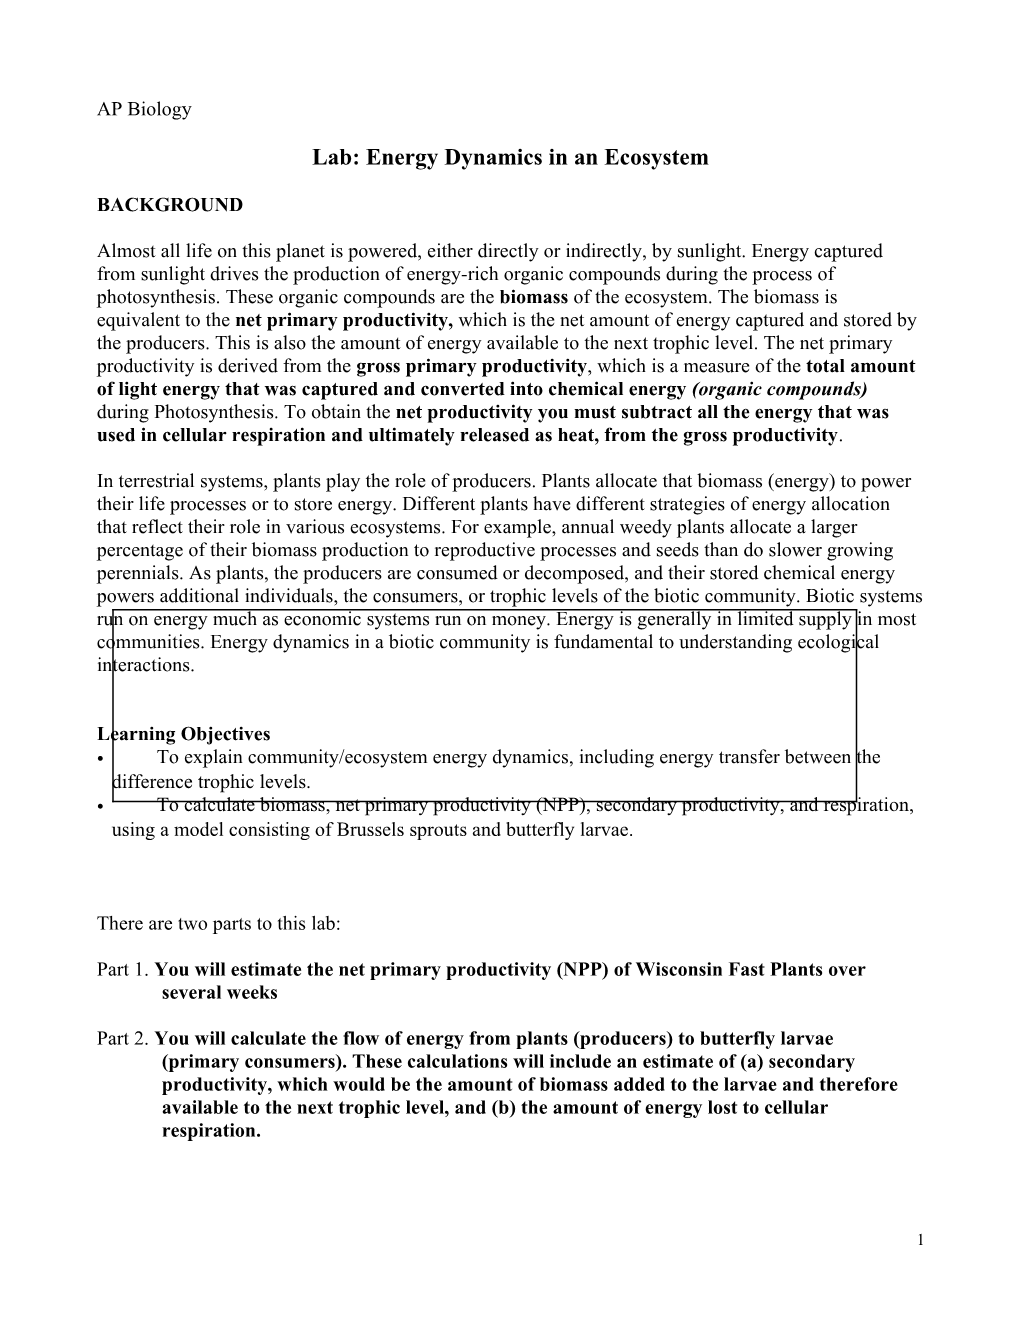 Lab: Energy Dynamics in an Ecosystem